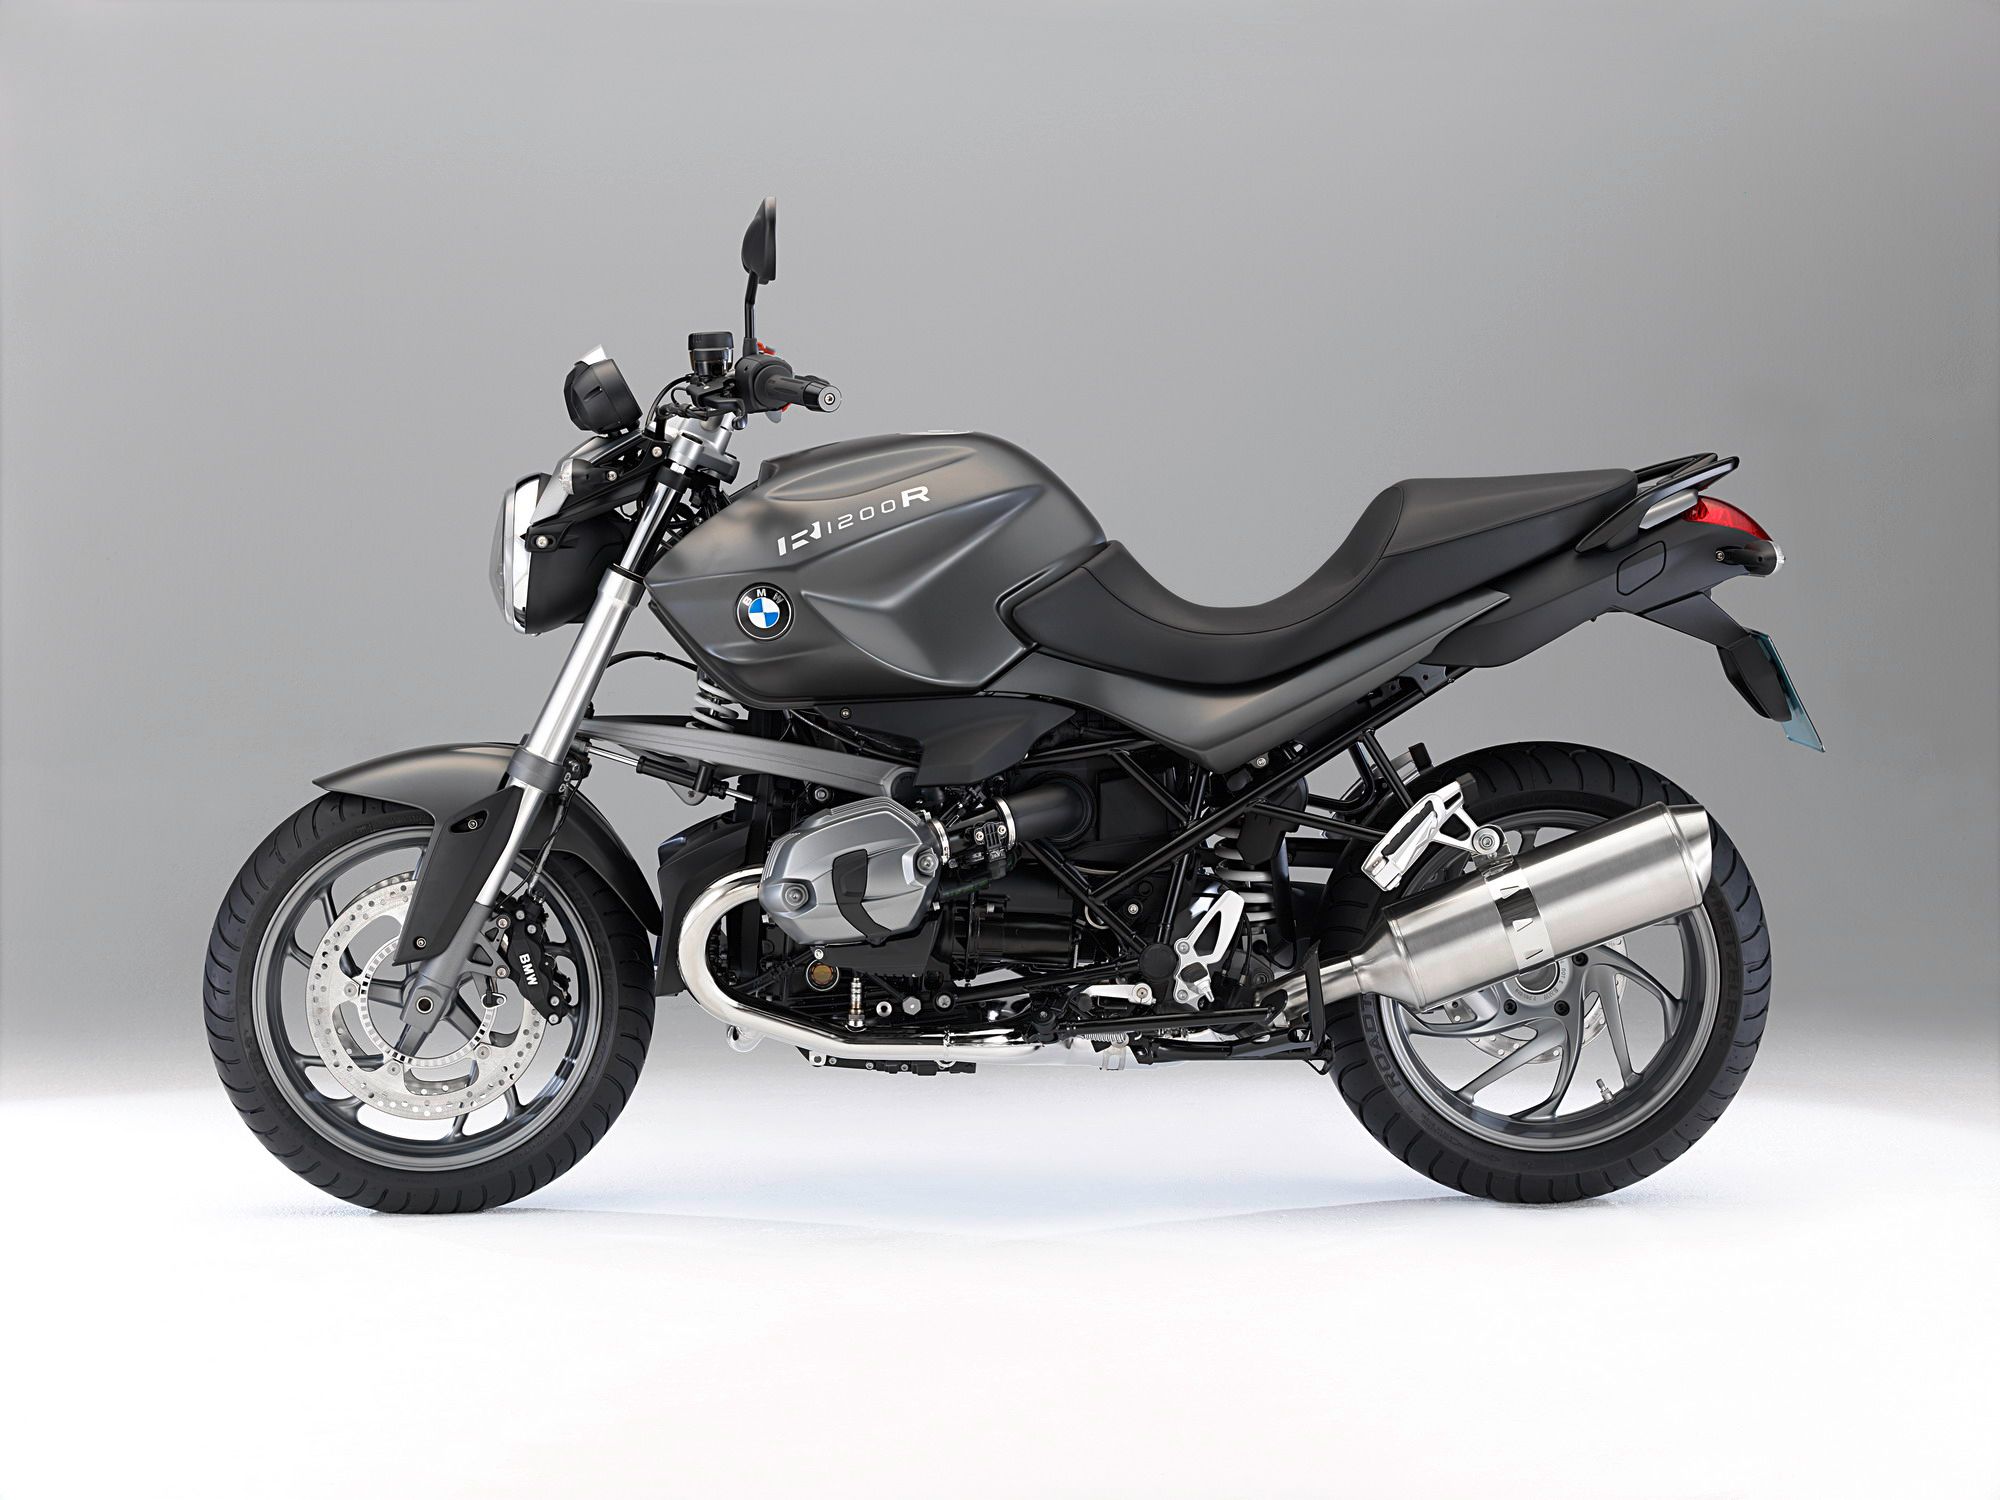 2011 BMW R 1200 R and R 1200 R Classic